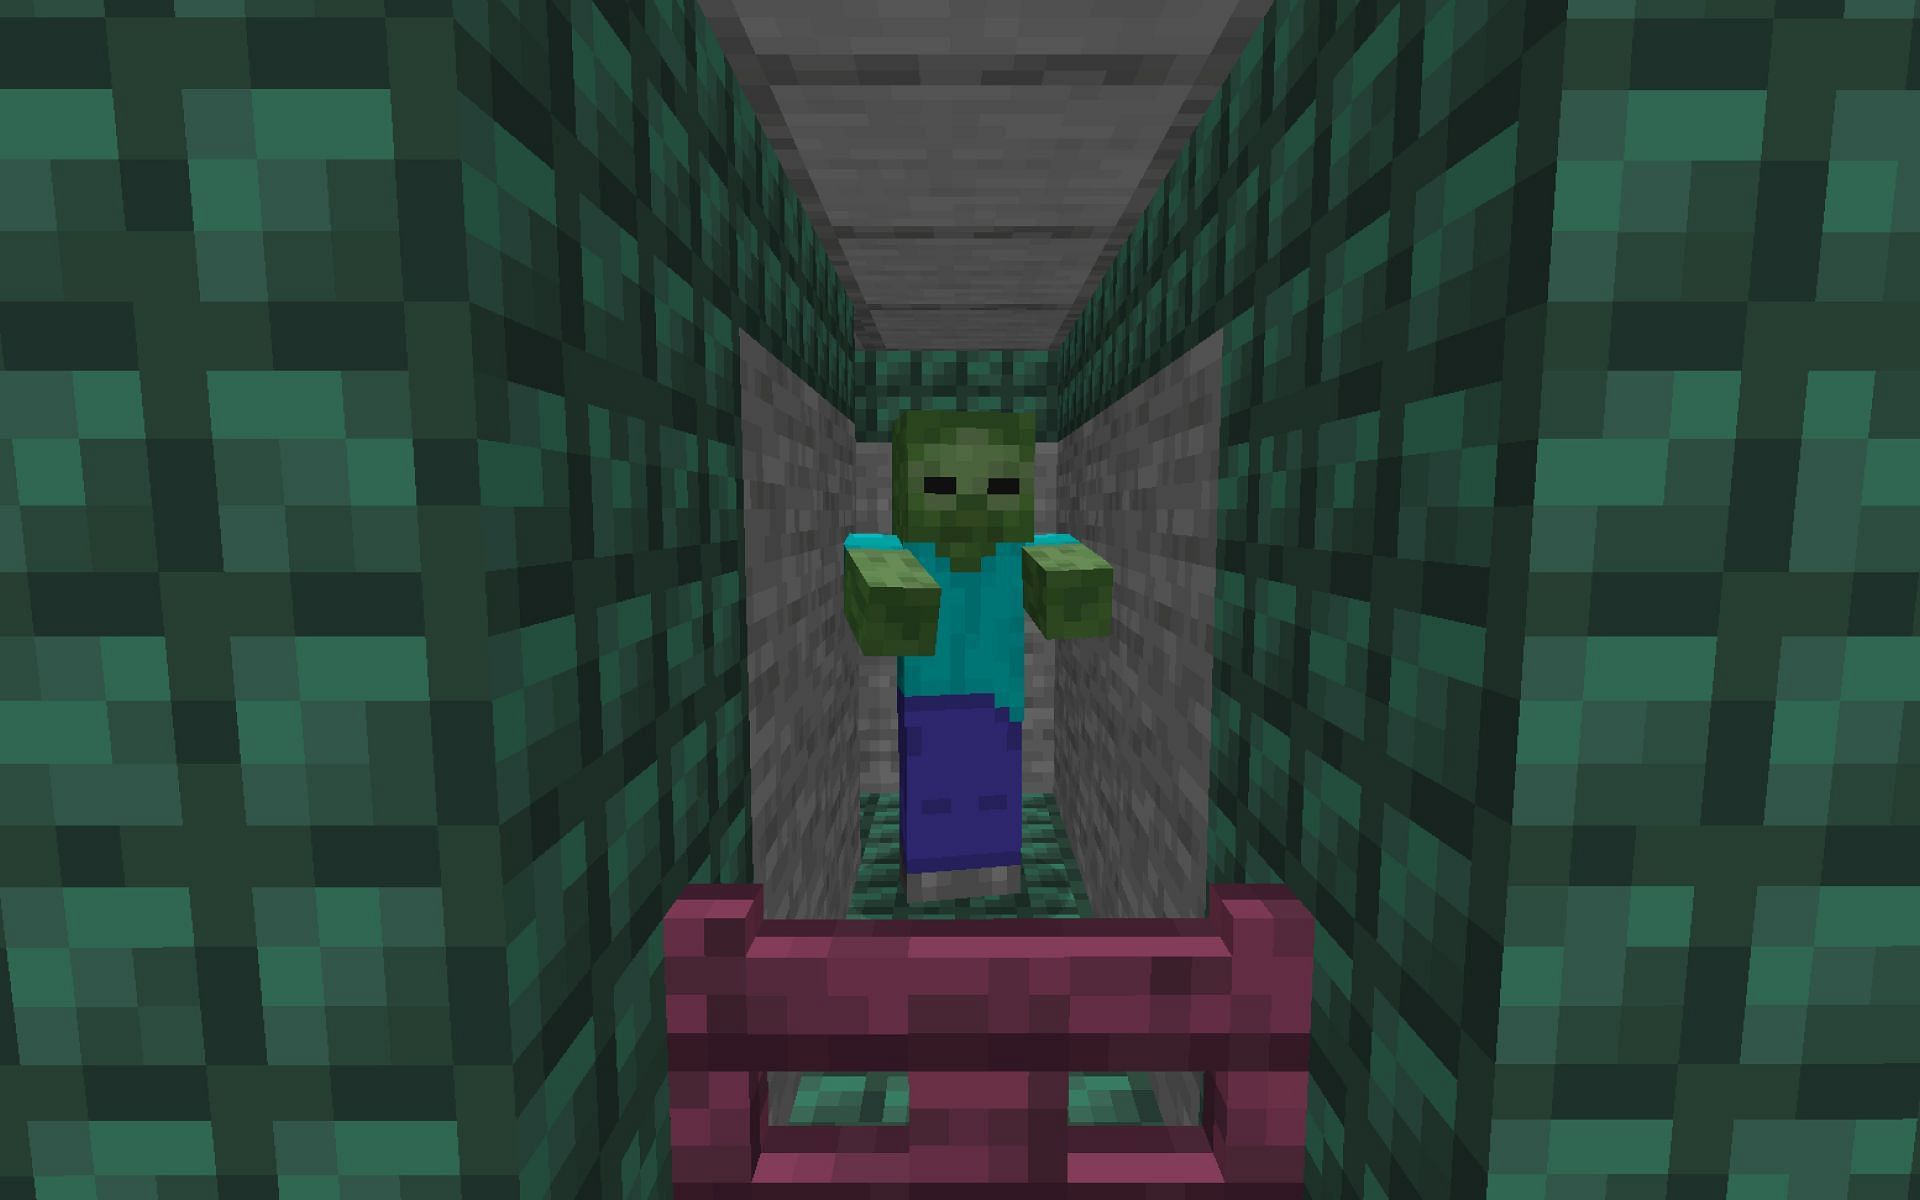 An image of a zombie that a player has captured in-game. Image via Minecraft.